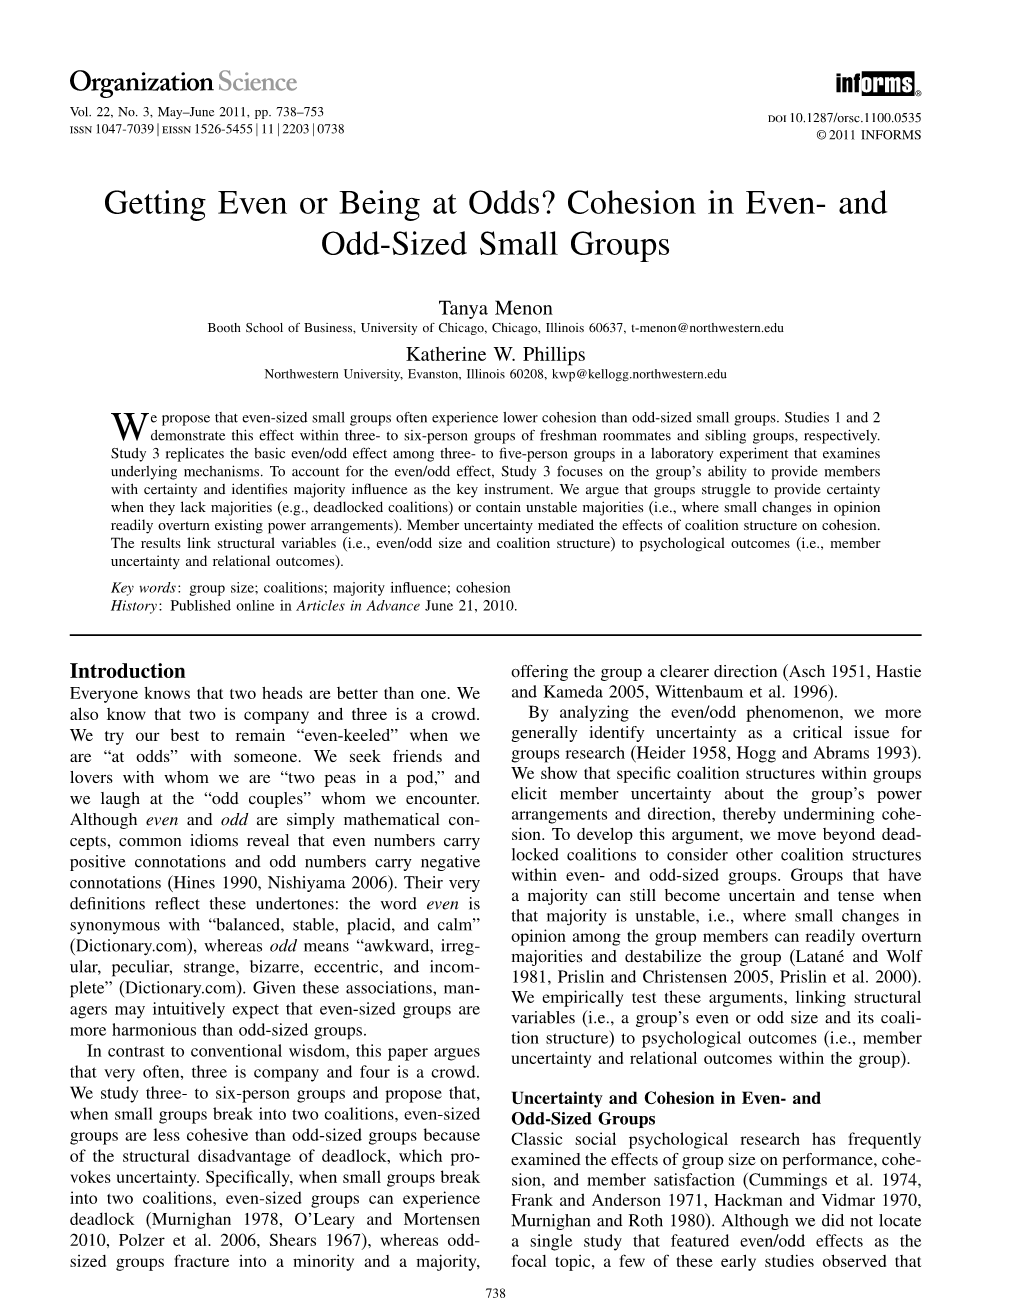 Cohesion in Even- and Odd-Sized Small Groups